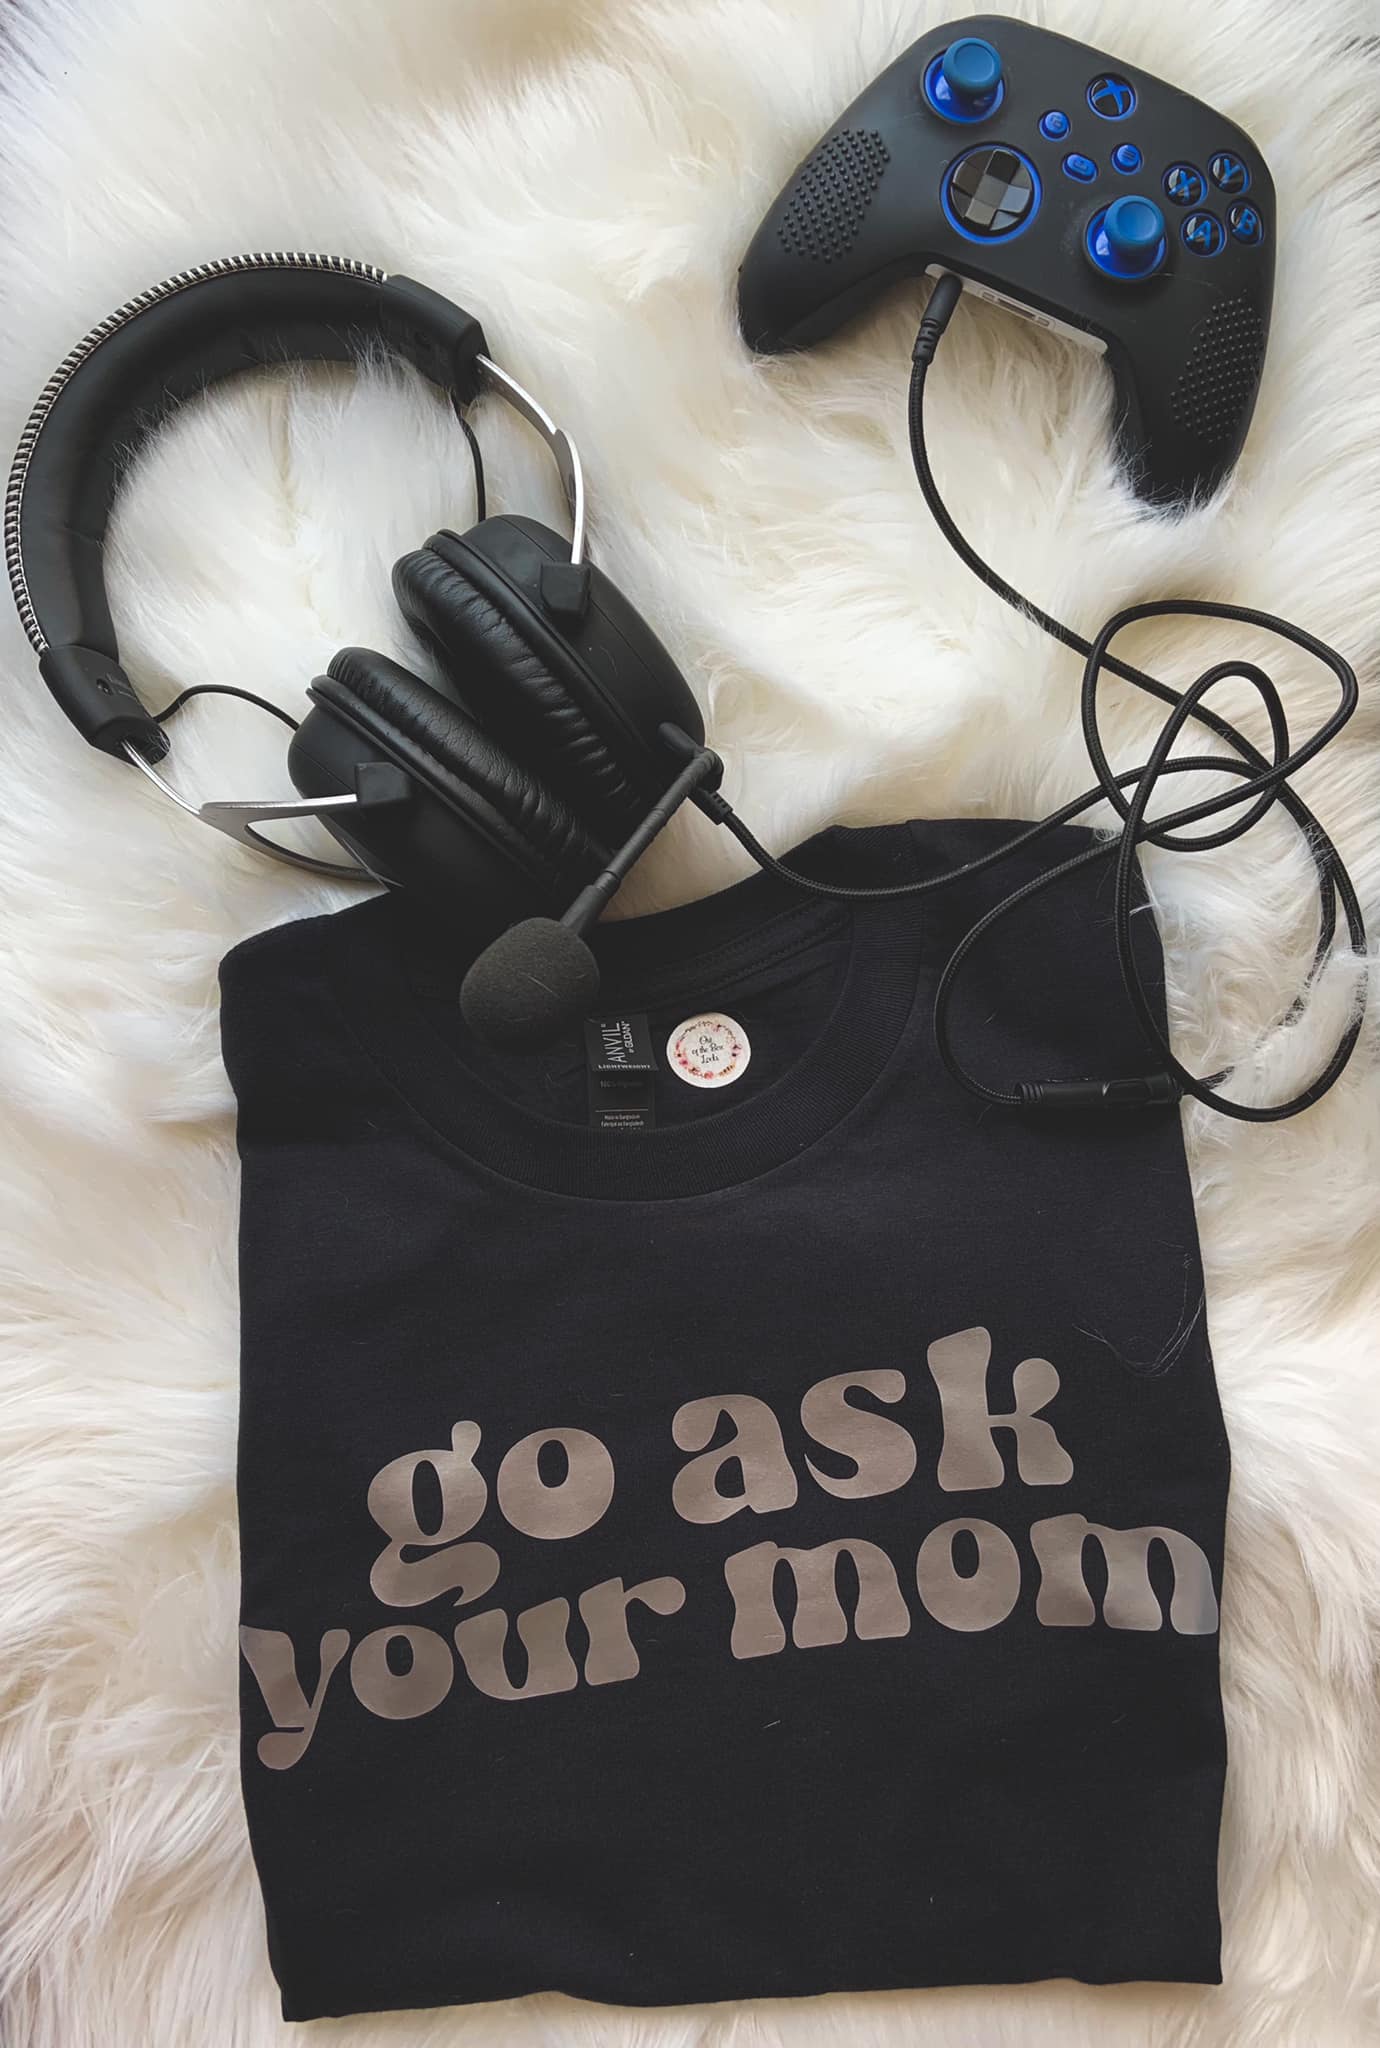 Go Ask Your Mom (Tee)